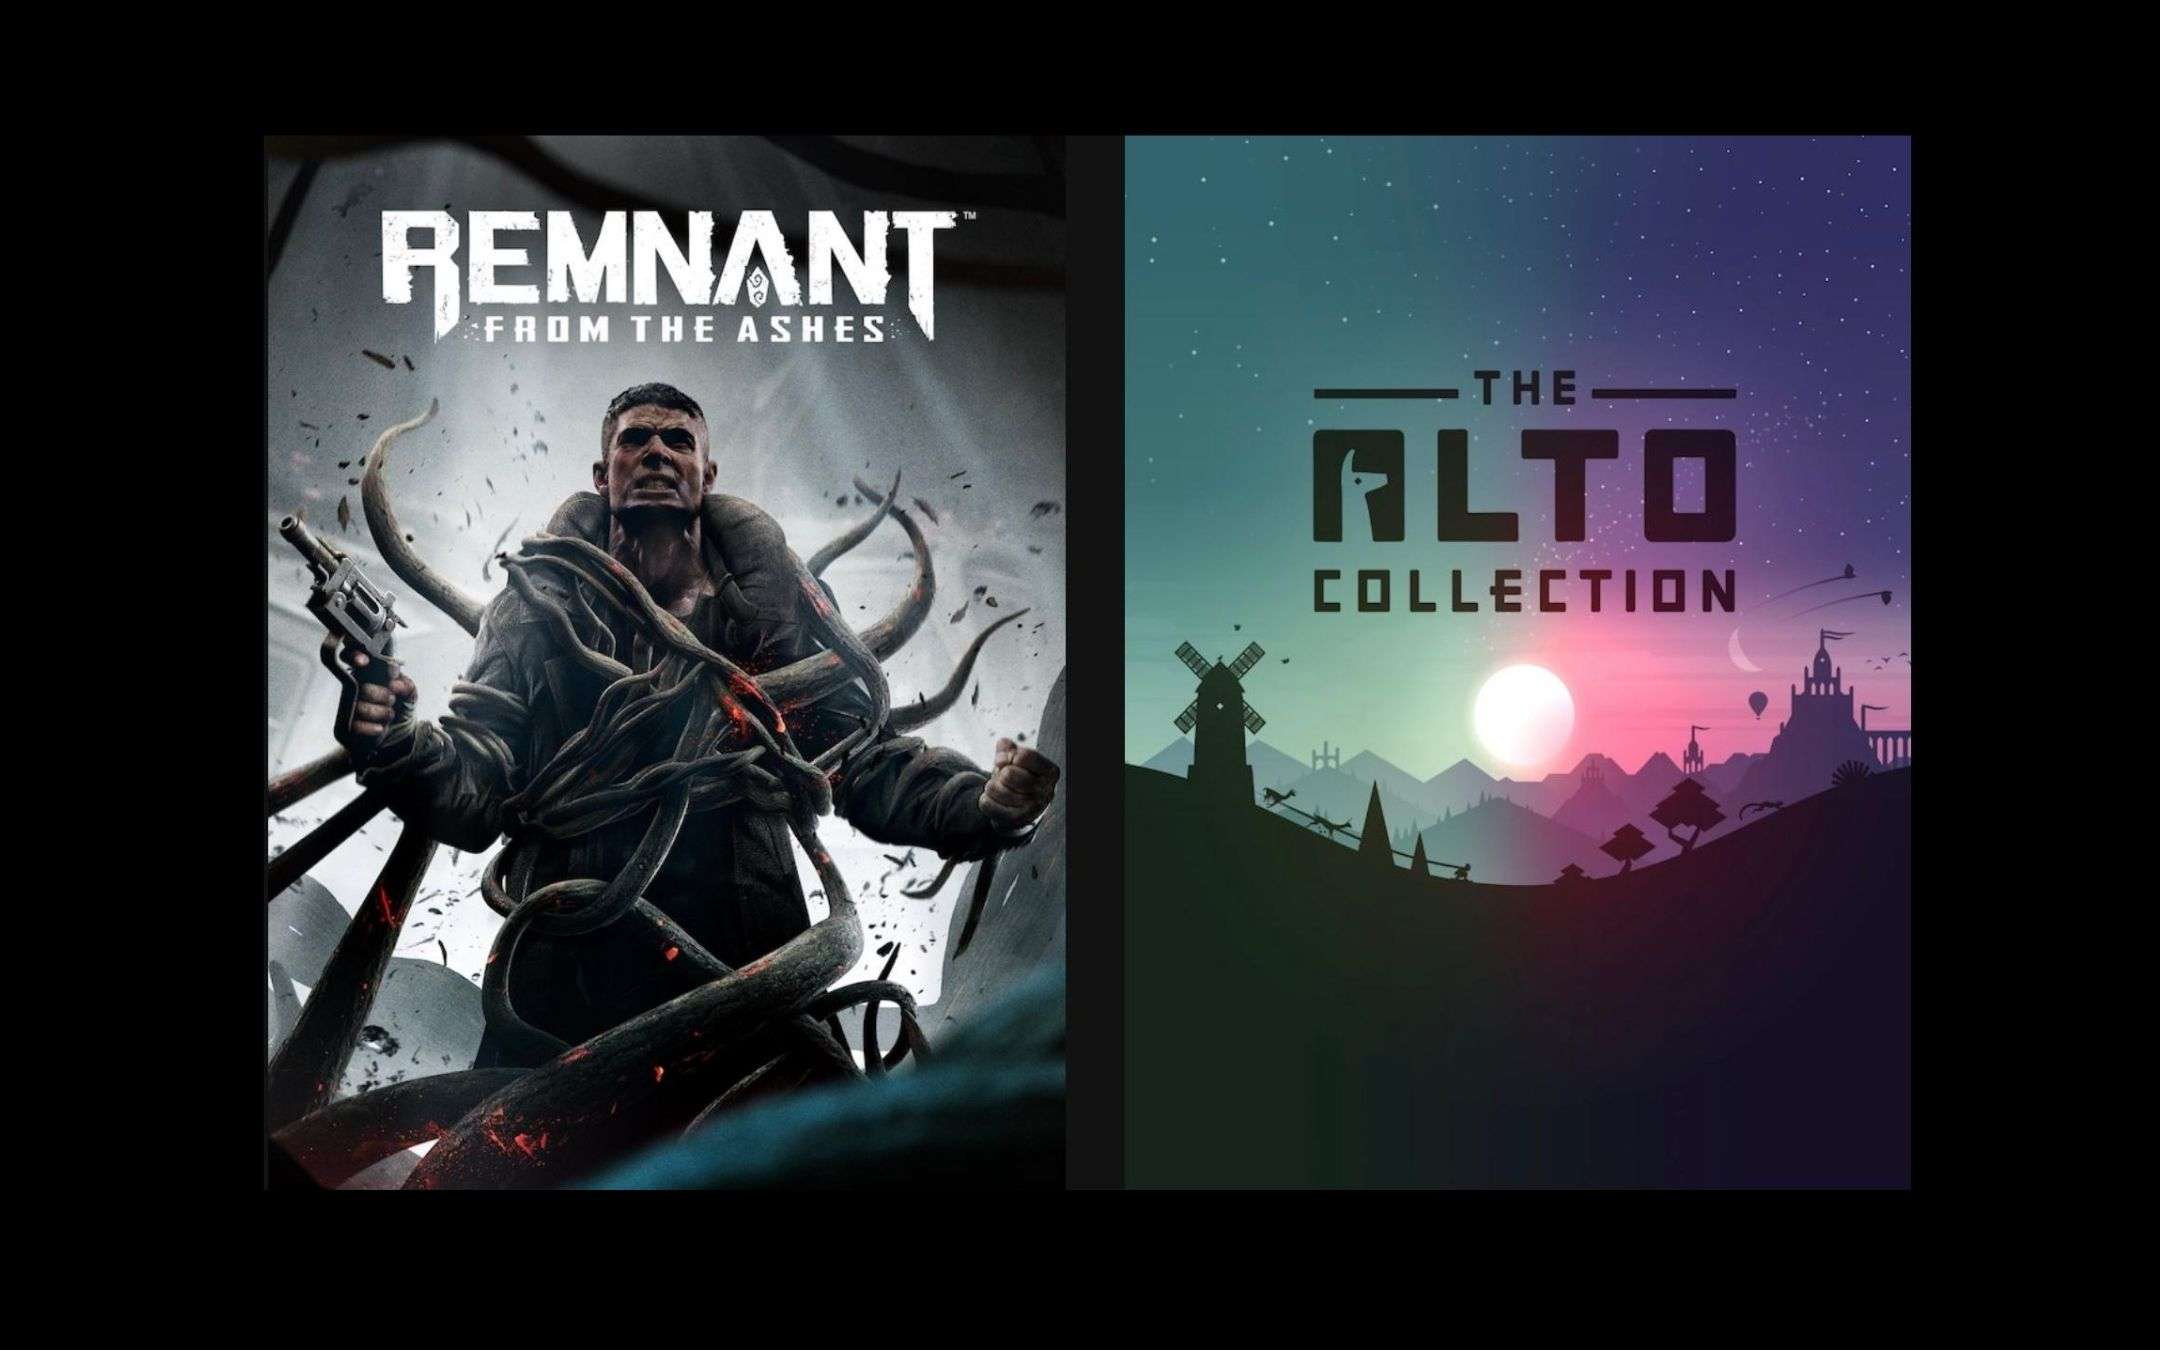 Remnant 2 обложка. Remnant 2 обложка игры. Remnant Collectors. The Alto collection.